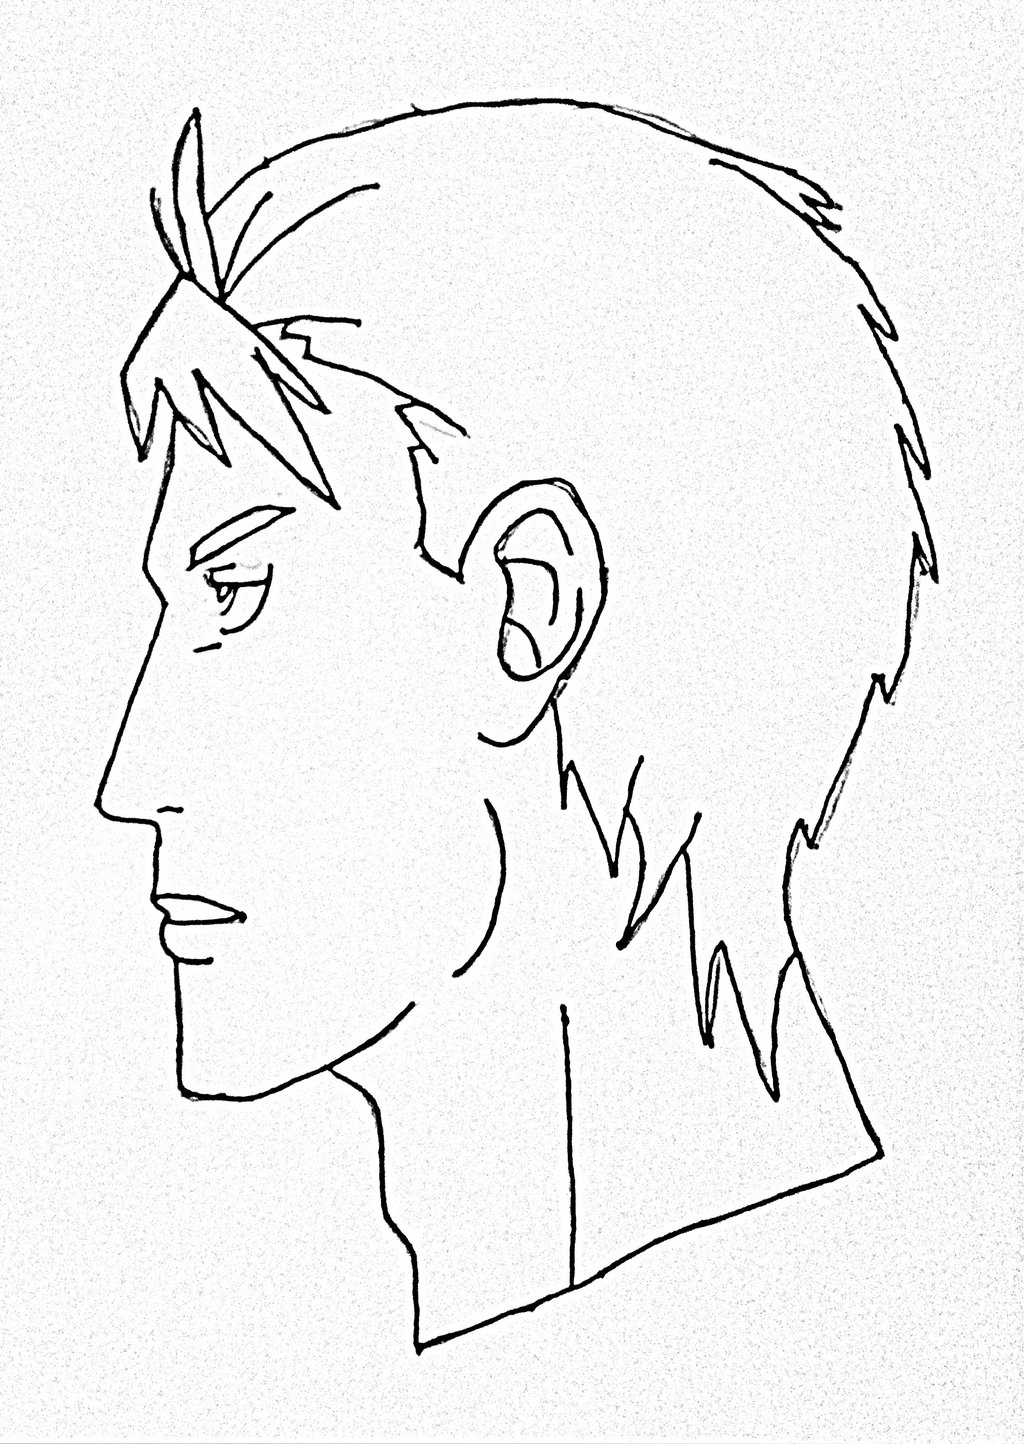 How To Draw Male Anime Face Side View Step By Step For Beginner Easy Video Tutorial Rock Draw Free images man person pencil black and white hair. how to draw male anime face side view